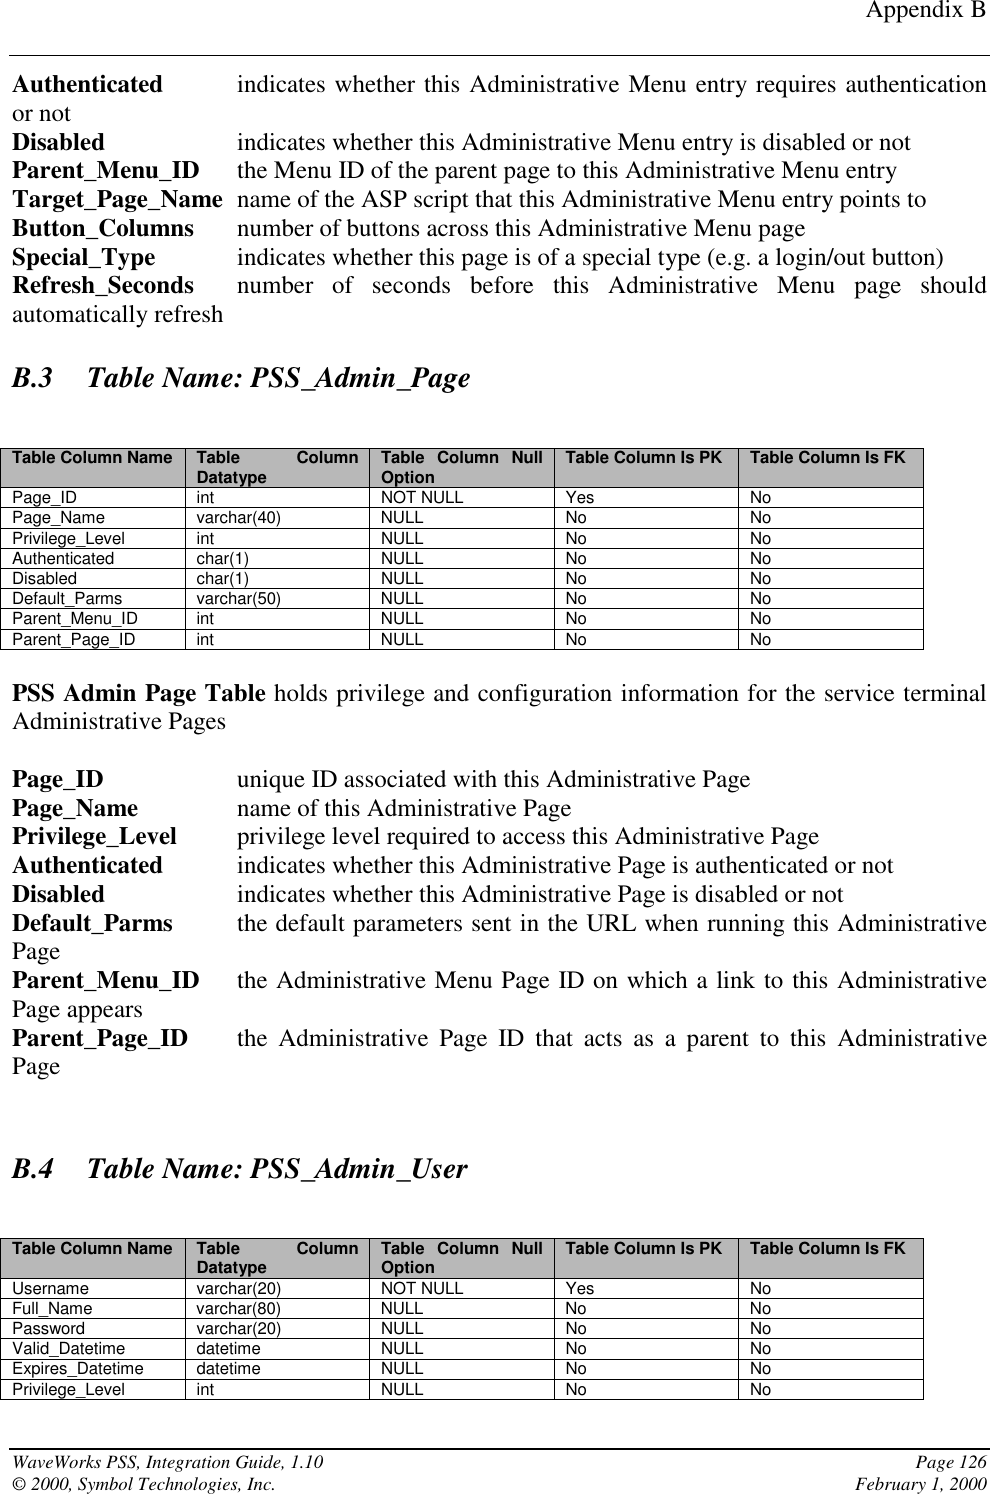 Appendix BWaveWorks PSS, Integration Guide, 1.10 Page 126© 2000, Symbol Technologies, Inc. February 1, 2000Authenticated indicates whether this Administrative Menu entry requires authenticationor notDisabled indicates whether this Administrative Menu entry is disabled or notParent_Menu_ID the Menu ID of the parent page to this Administrative Menu entryTarget_Page_Name name of the ASP script that this Administrative Menu entry points toButton_Columns number of buttons across this Administrative Menu pageSpecial_Type indicates whether this page is of a special type (e.g. a login/out button)Refresh_Seconds number of seconds before this Administrative Menu page shouldautomatically refreshB.3 Table Name: PSS_Admin_PageTable Column Name Table ColumnDatatype Table Column NullOption Table Column Is PK Table Column Is FKPage_ID int NOT NULL Yes NoPage_Name varchar(40) NULL No NoPrivilege_Level int NULL No NoAuthenticated char(1) NULL No NoDisabled char(1) NULL No NoDefault_Parms varchar(50) NULL No NoParent_Menu_ID int NULL No NoParent_Page_ID int NULL No NoPSS Admin Page Table holds privilege and configuration information for the service terminalAdministrative PagesPage_ID unique ID associated with this Administrative PagePage_Name name of this Administrative PagePrivilege_Level privilege level required to access this Administrative PageAuthenticated indicates whether this Administrative Page is authenticated or notDisabled indicates whether this Administrative Page is disabled or notDefault_Parms the default parameters sent in the URL when running this AdministrativePageParent_Menu_ID the Administrative Menu Page ID on which a link to this AdministrativePage appearsParent_Page_ID the Administrative Page ID that acts as a parent to this AdministrativePageB.4 Table Name: PSS_Admin_UserTable Column Name Table ColumnDatatype Table Column NullOption Table Column Is PK Table Column Is FKUsername varchar(20) NOT NULL Yes NoFull_Name varchar(80) NULL No NoPassword varchar(20) NULL No NoValid_Datetime datetime NULL No NoExpires_Datetime datetime NULL No NoPrivilege_Level int NULL No No